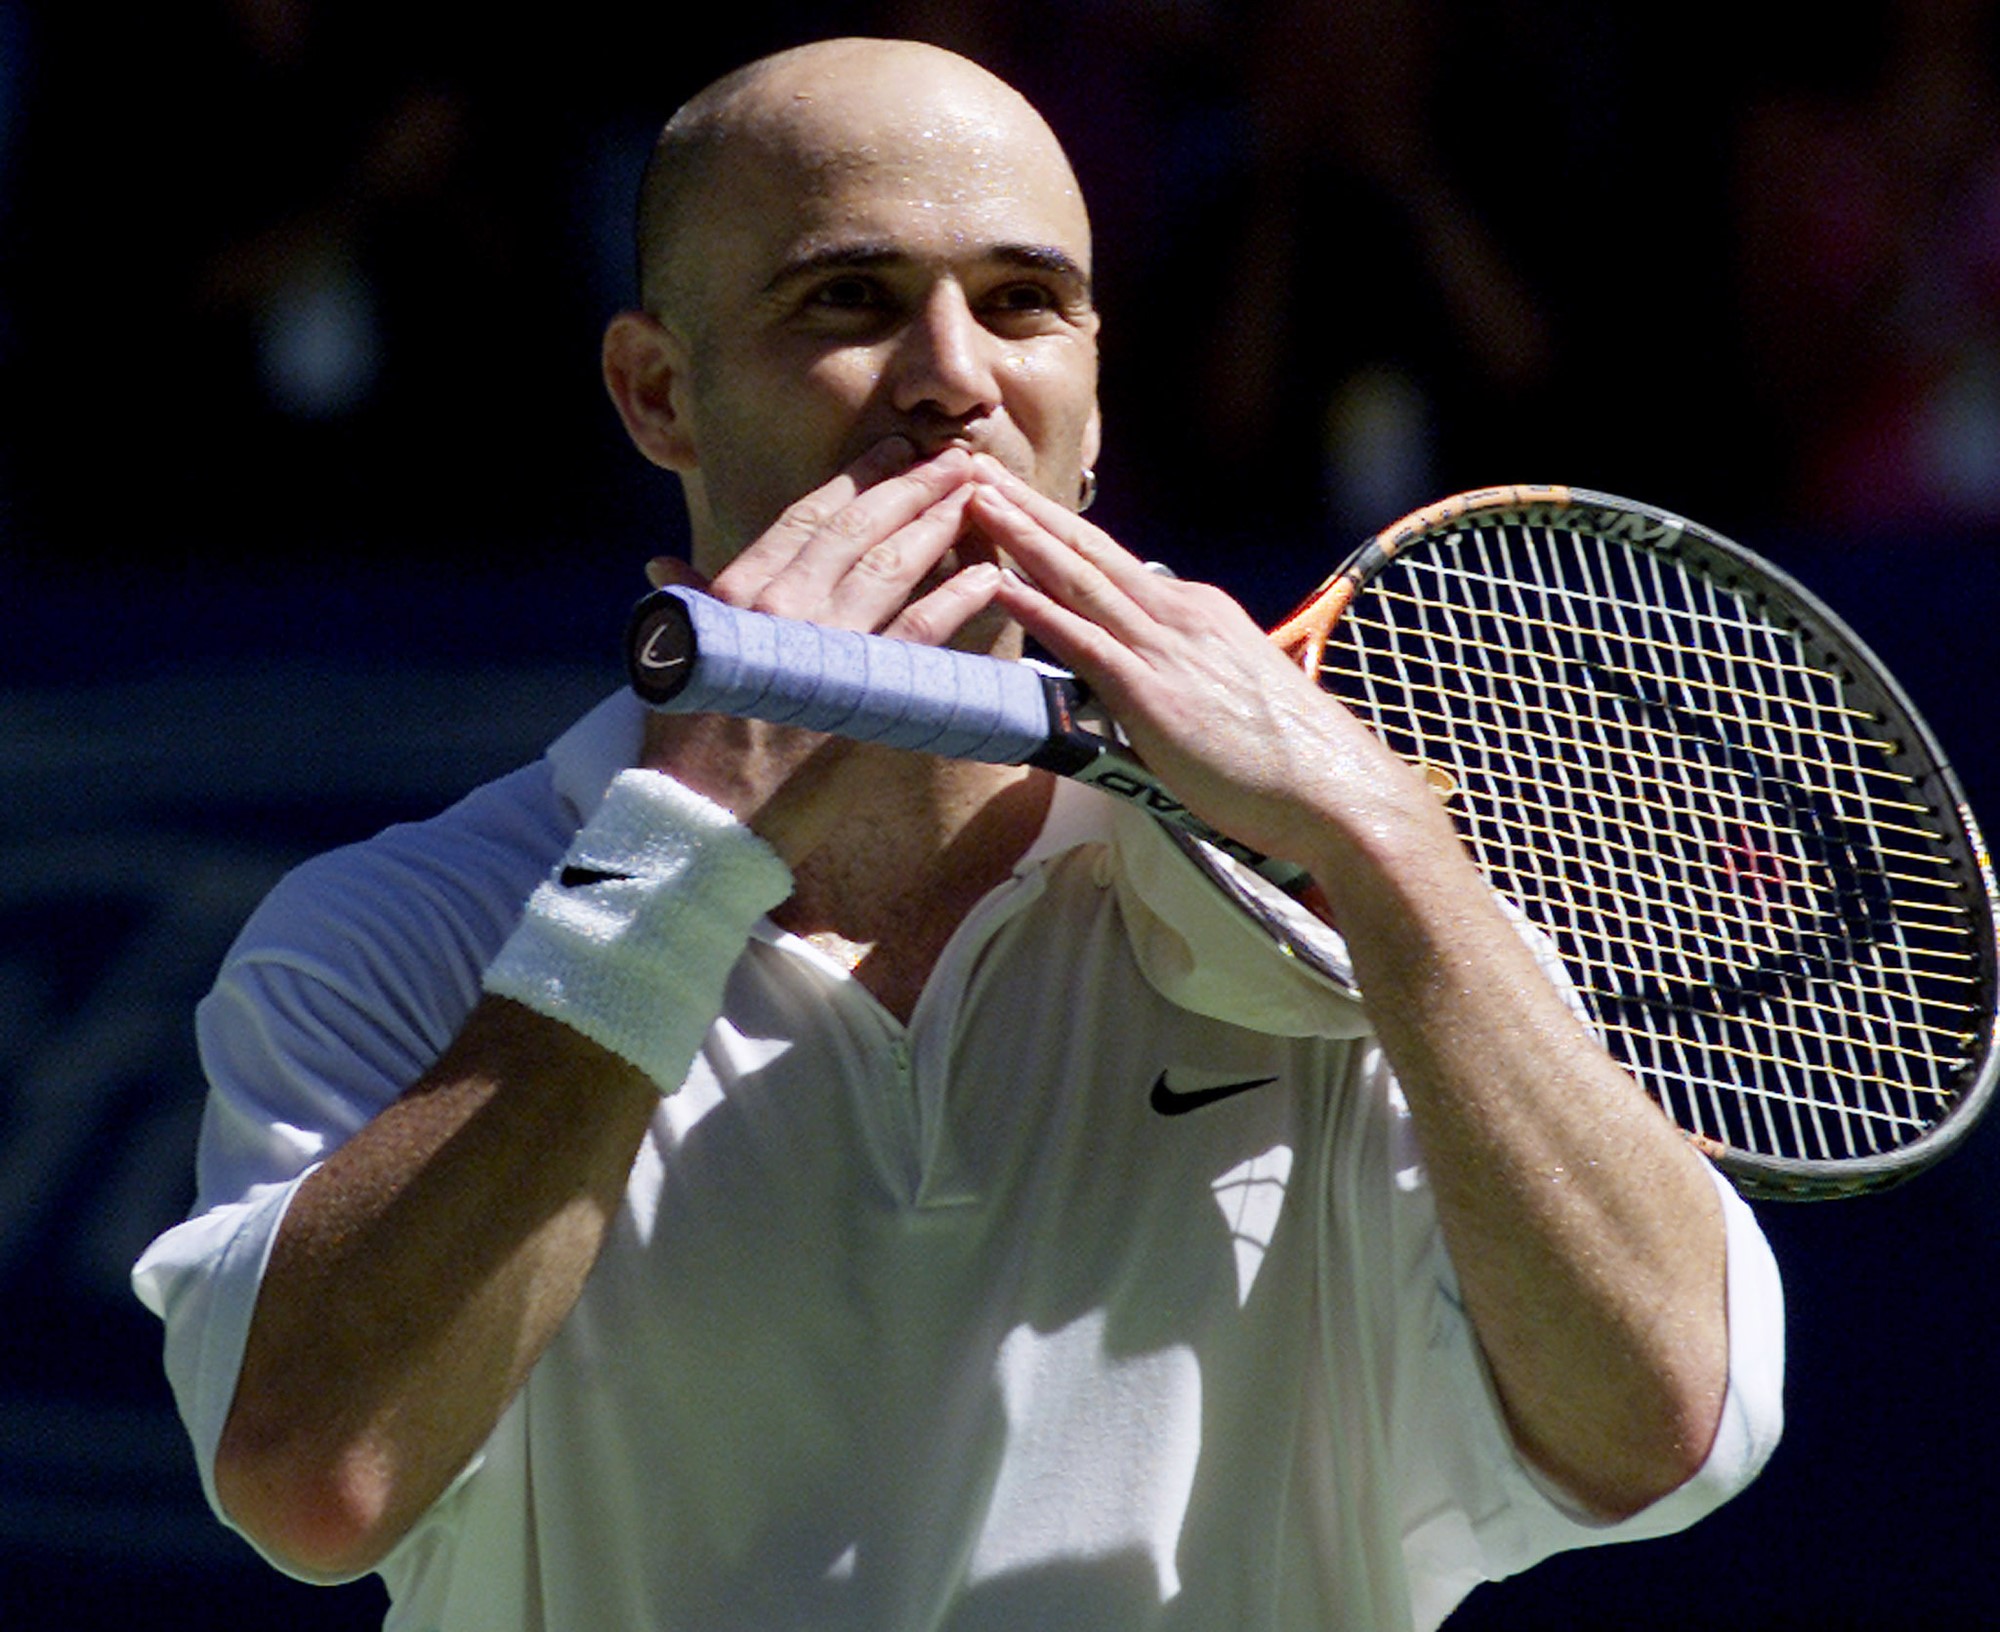 Andre Agassi blows a kiss to the crowd.